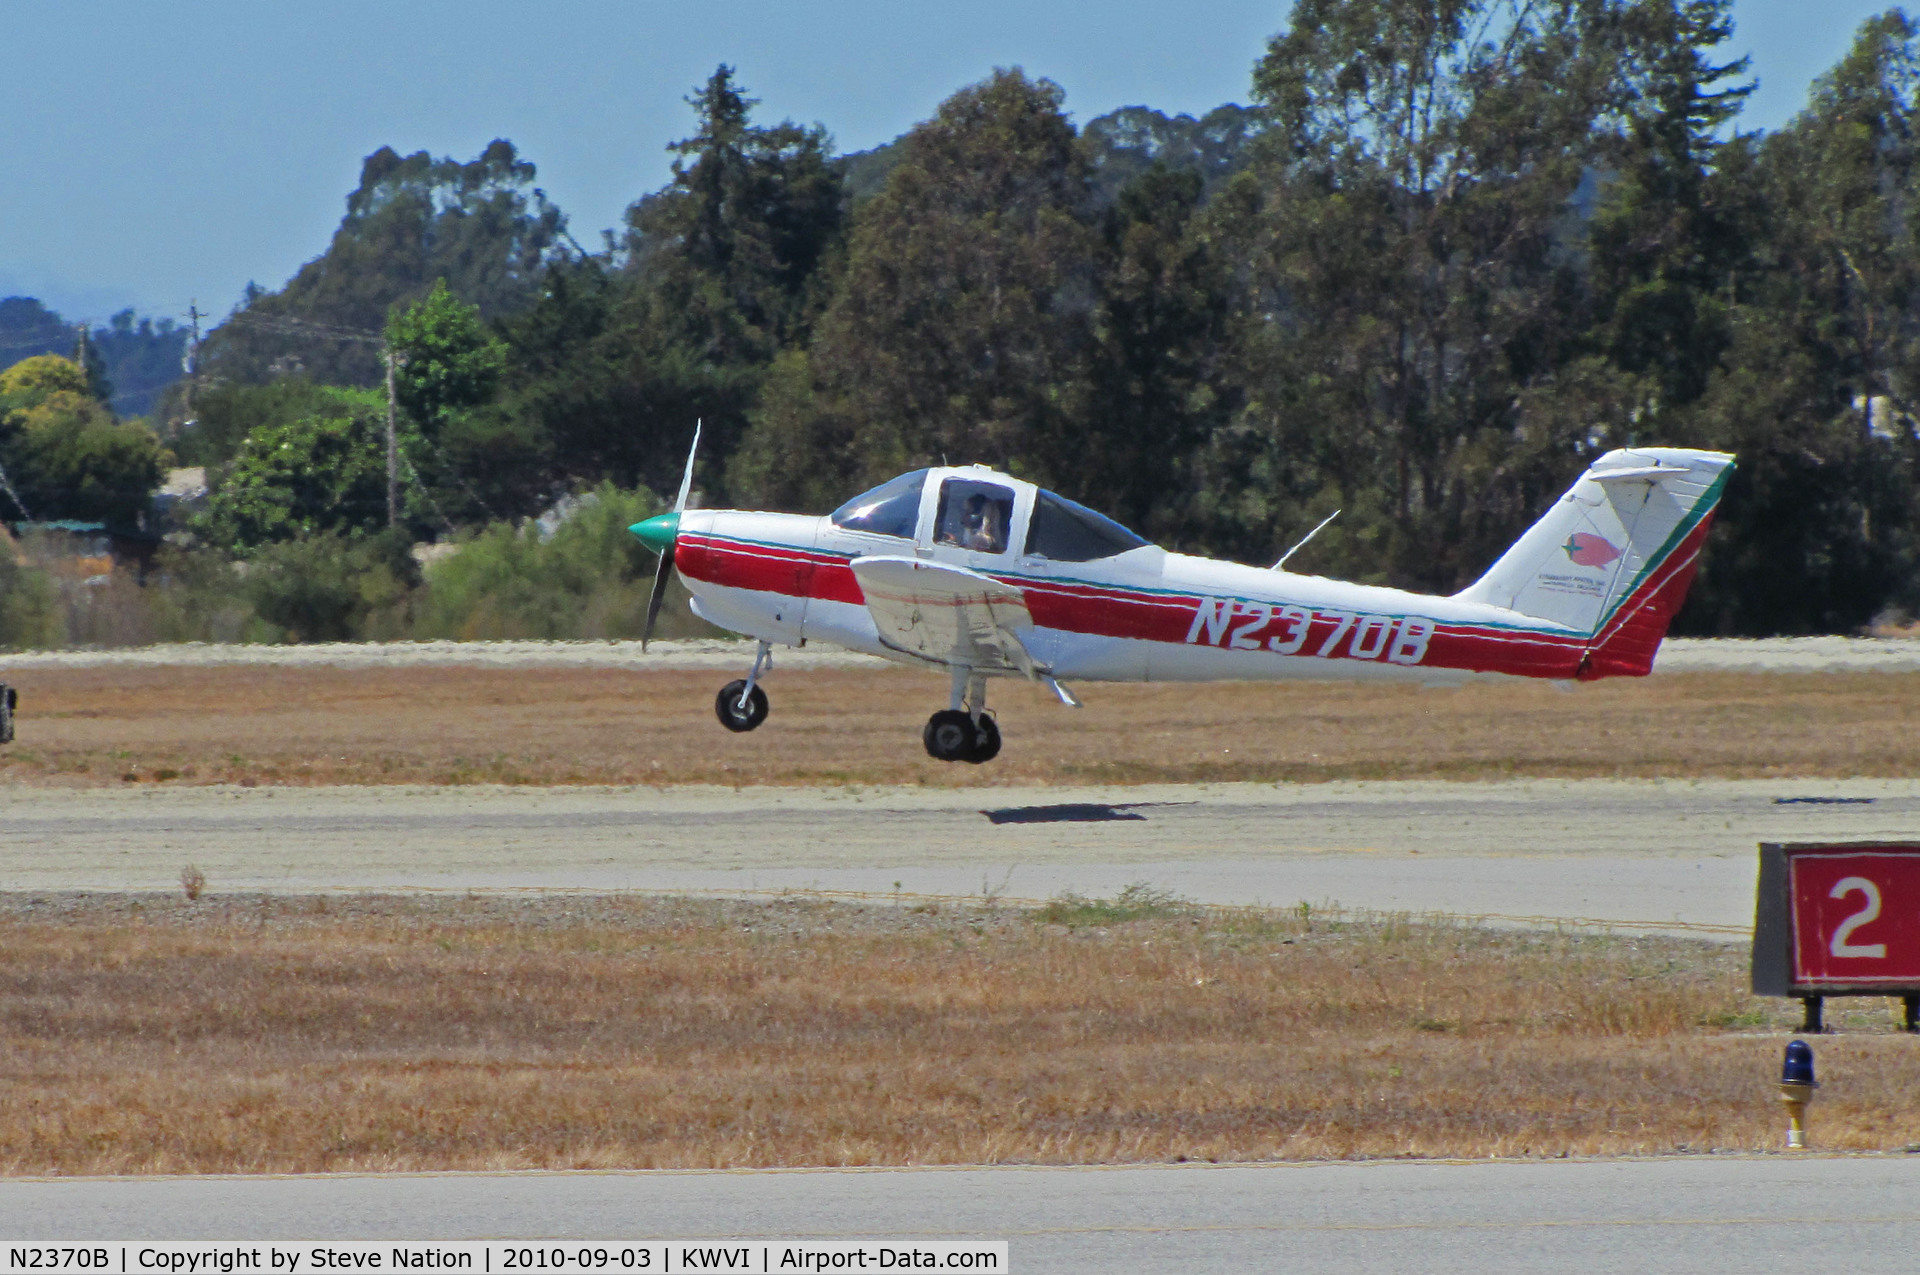 N2370B, 1978 Piper PA-38-112 Tomahawk Tomahawk C/N 38-79A0028, Strawberry Aviation 1978 PA-38-112 landing at her home base @ Watsonville Fly-In